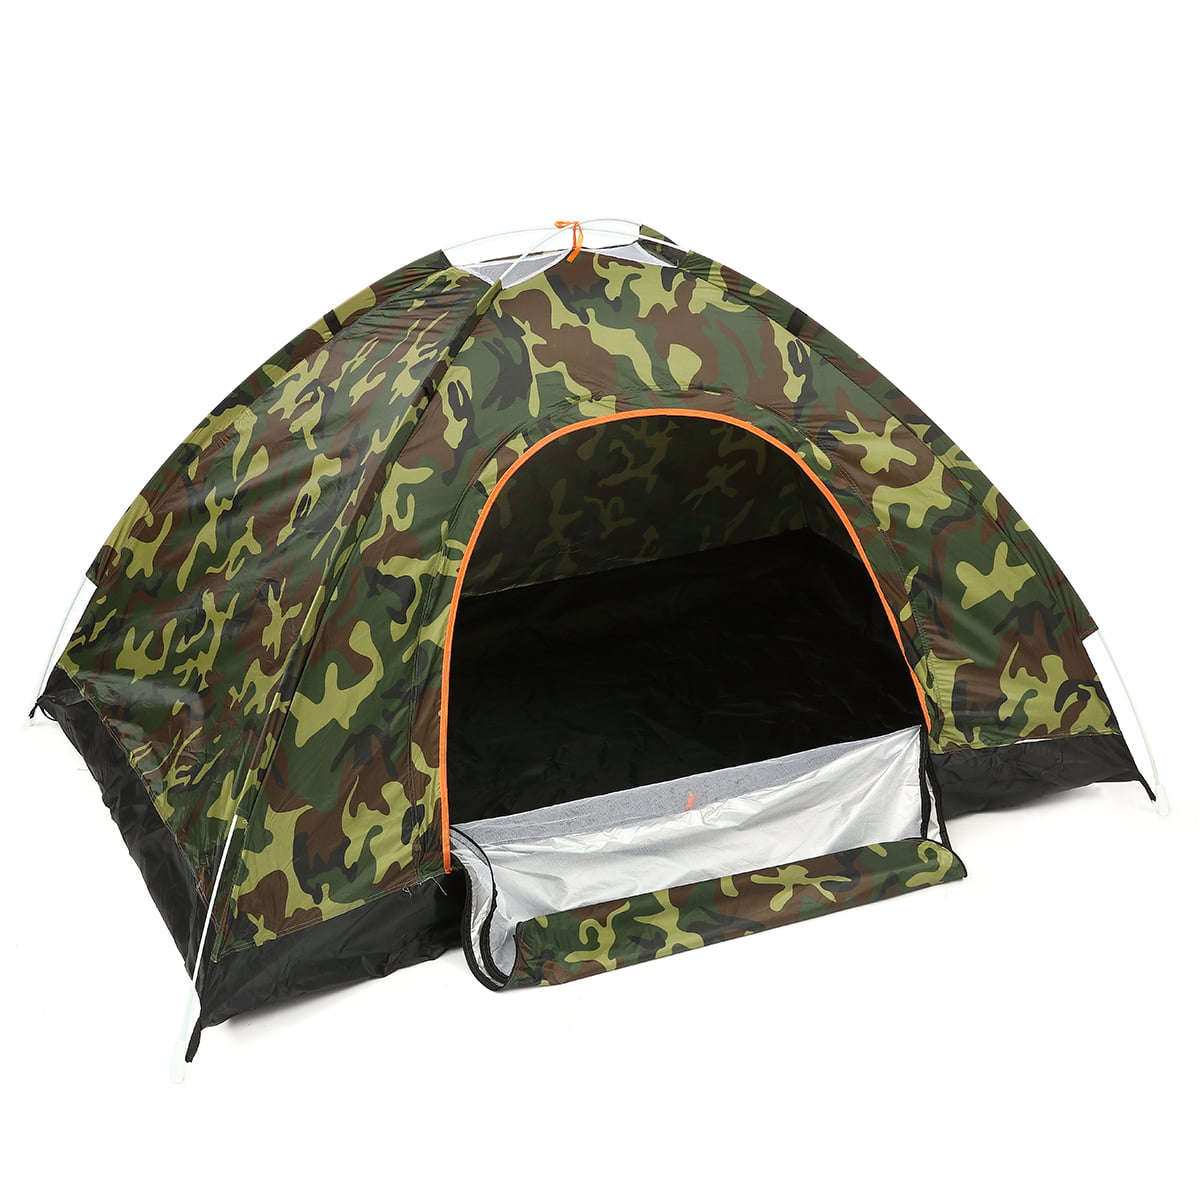 Waterproof 2 Person Man Tent Folding Camping Hiking Outdoor Beach Camo Tent new 